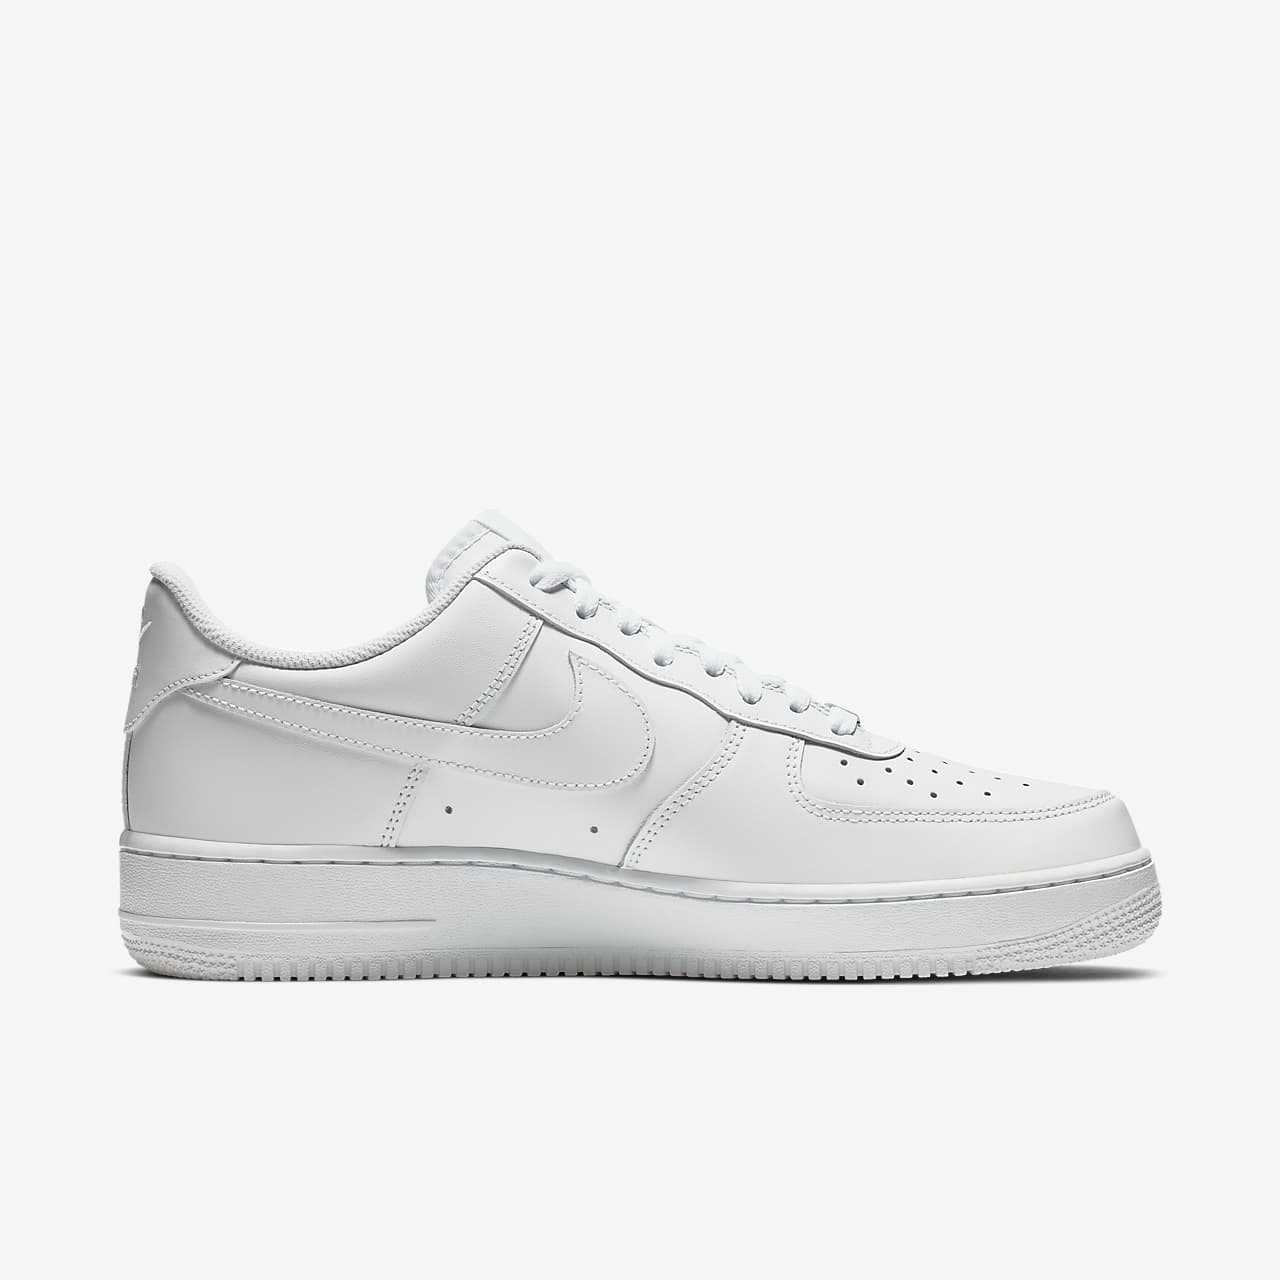 Nike Air Force 1 Low White | Buy Online At The Best Price In Accra